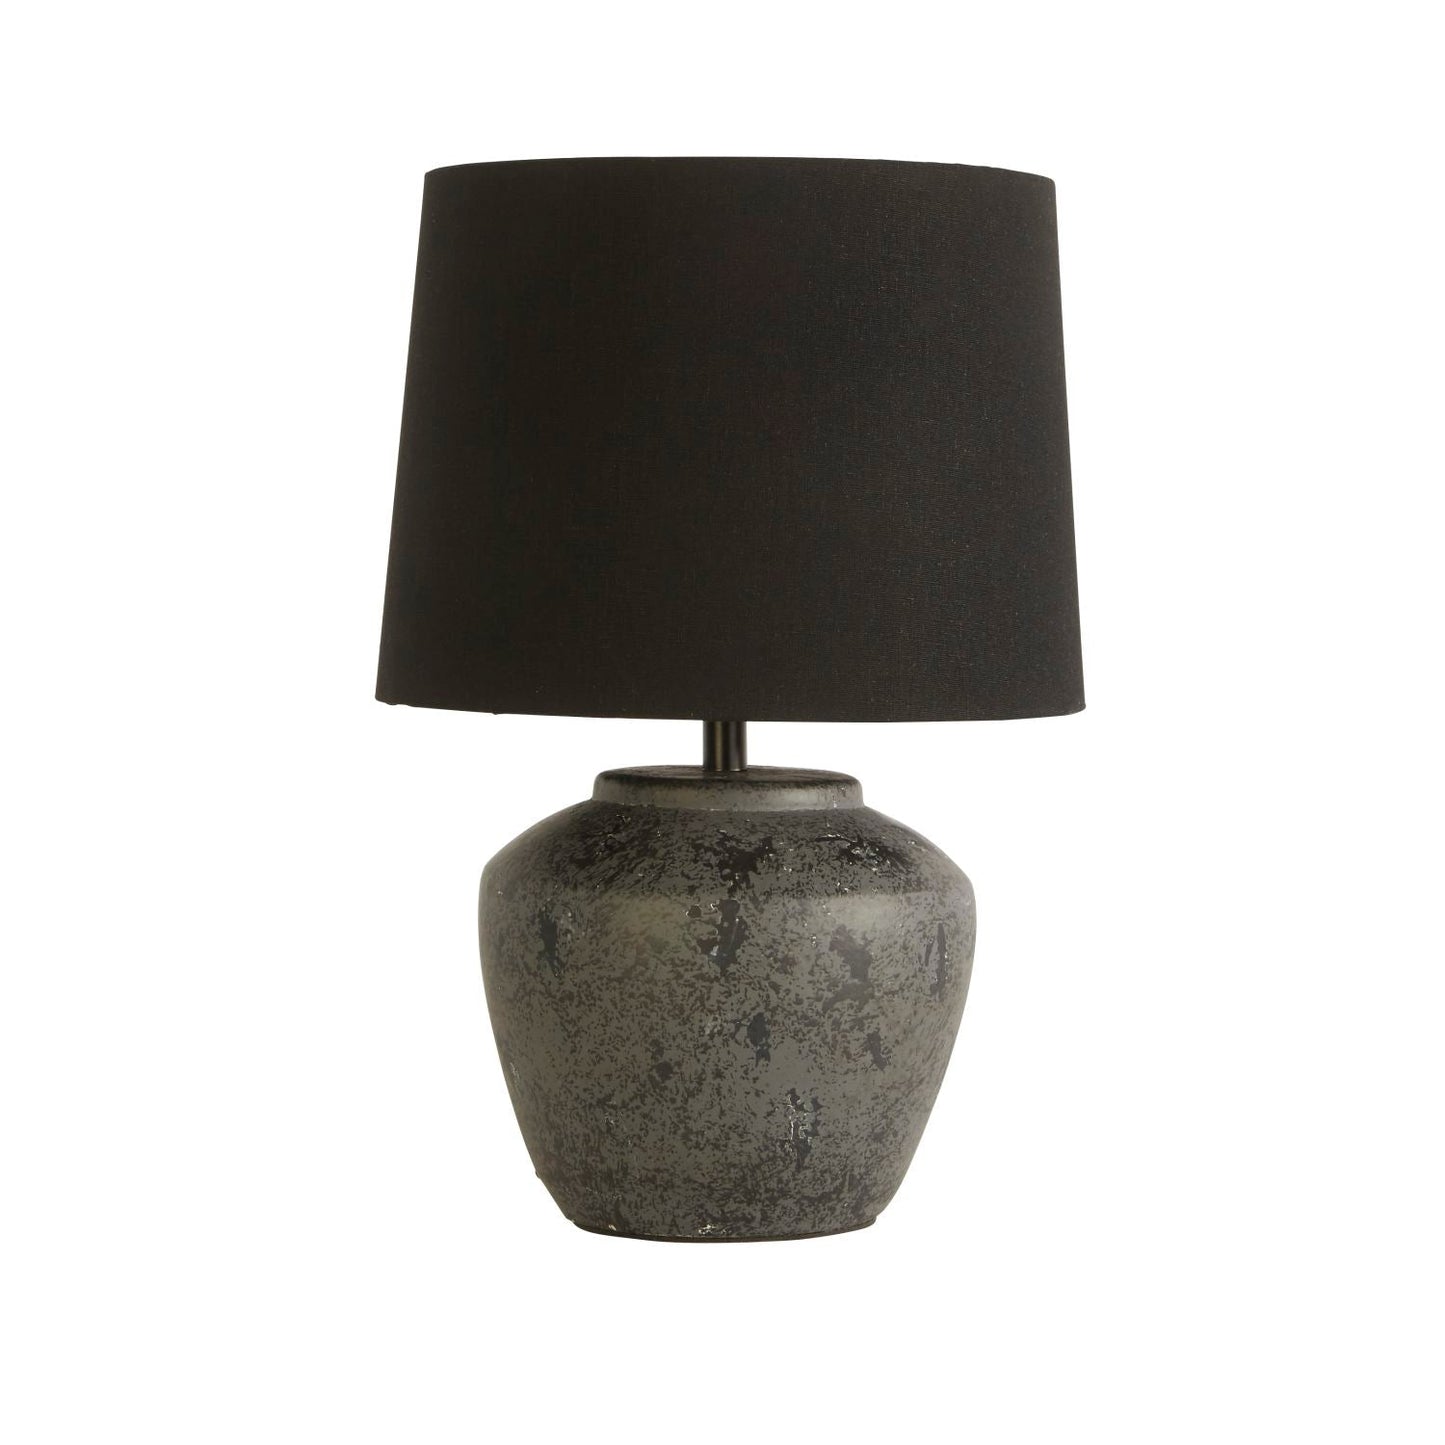 Black Ceramic Table Lamp with Shade